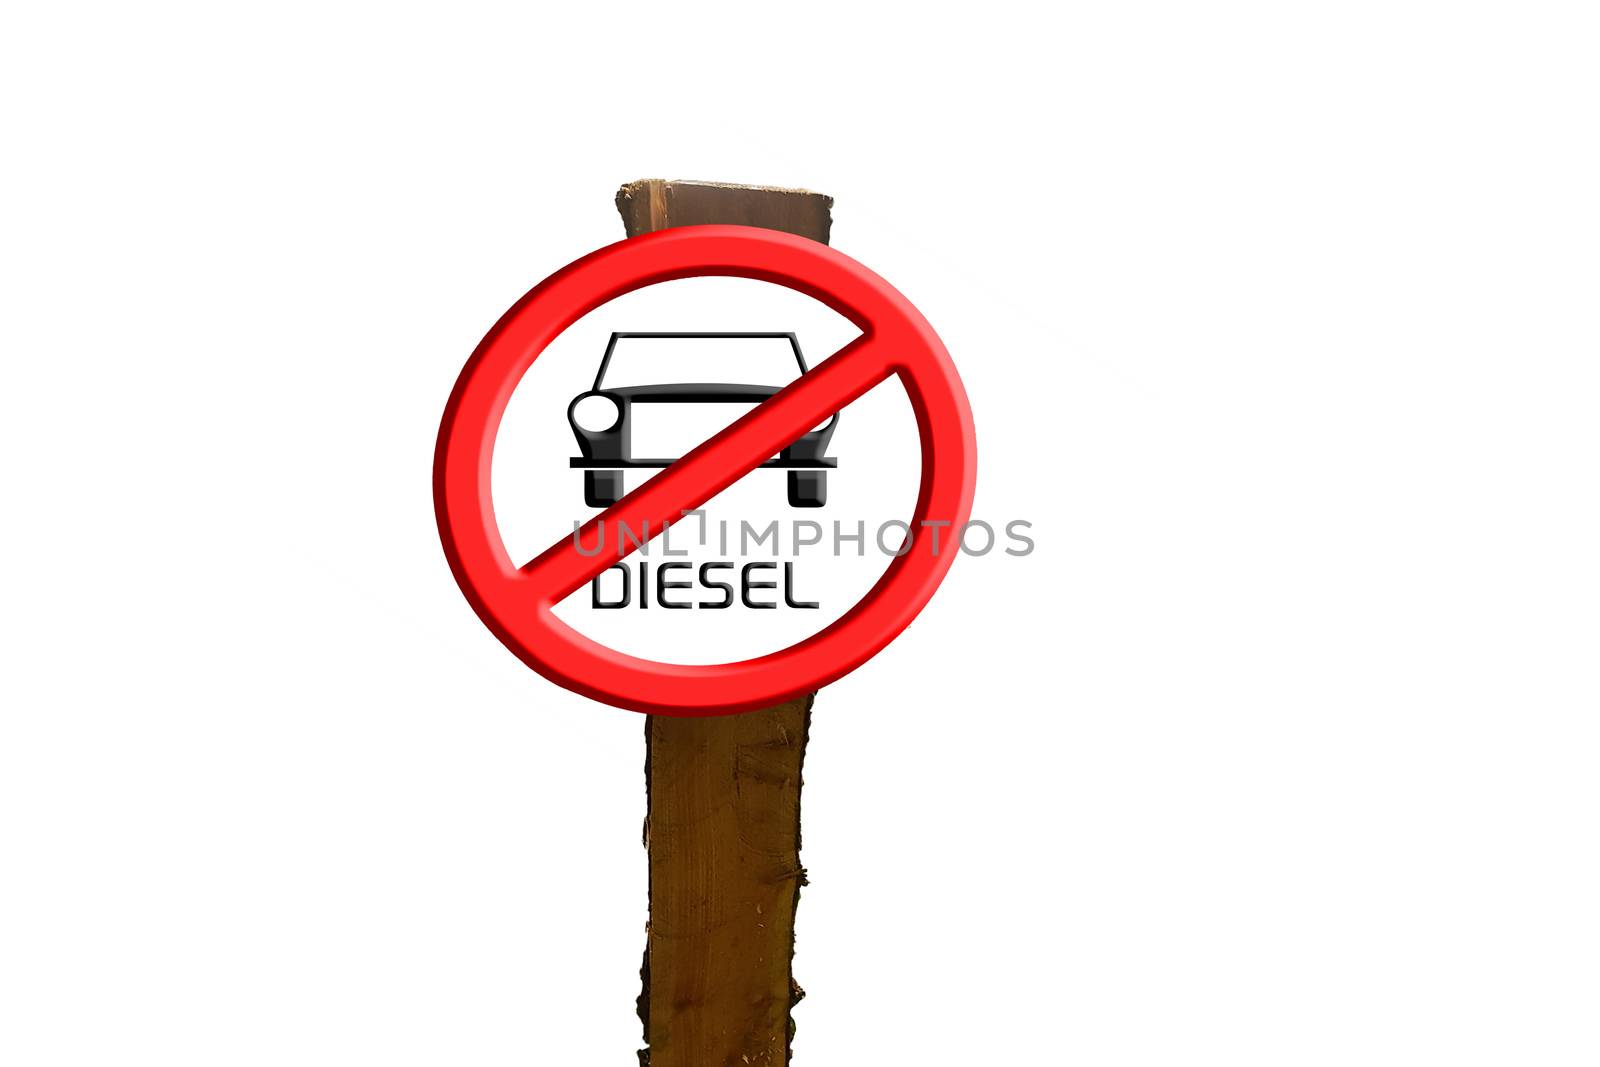 Sign Diesel cars prohibited against blue sky and sun.           by JFsPic